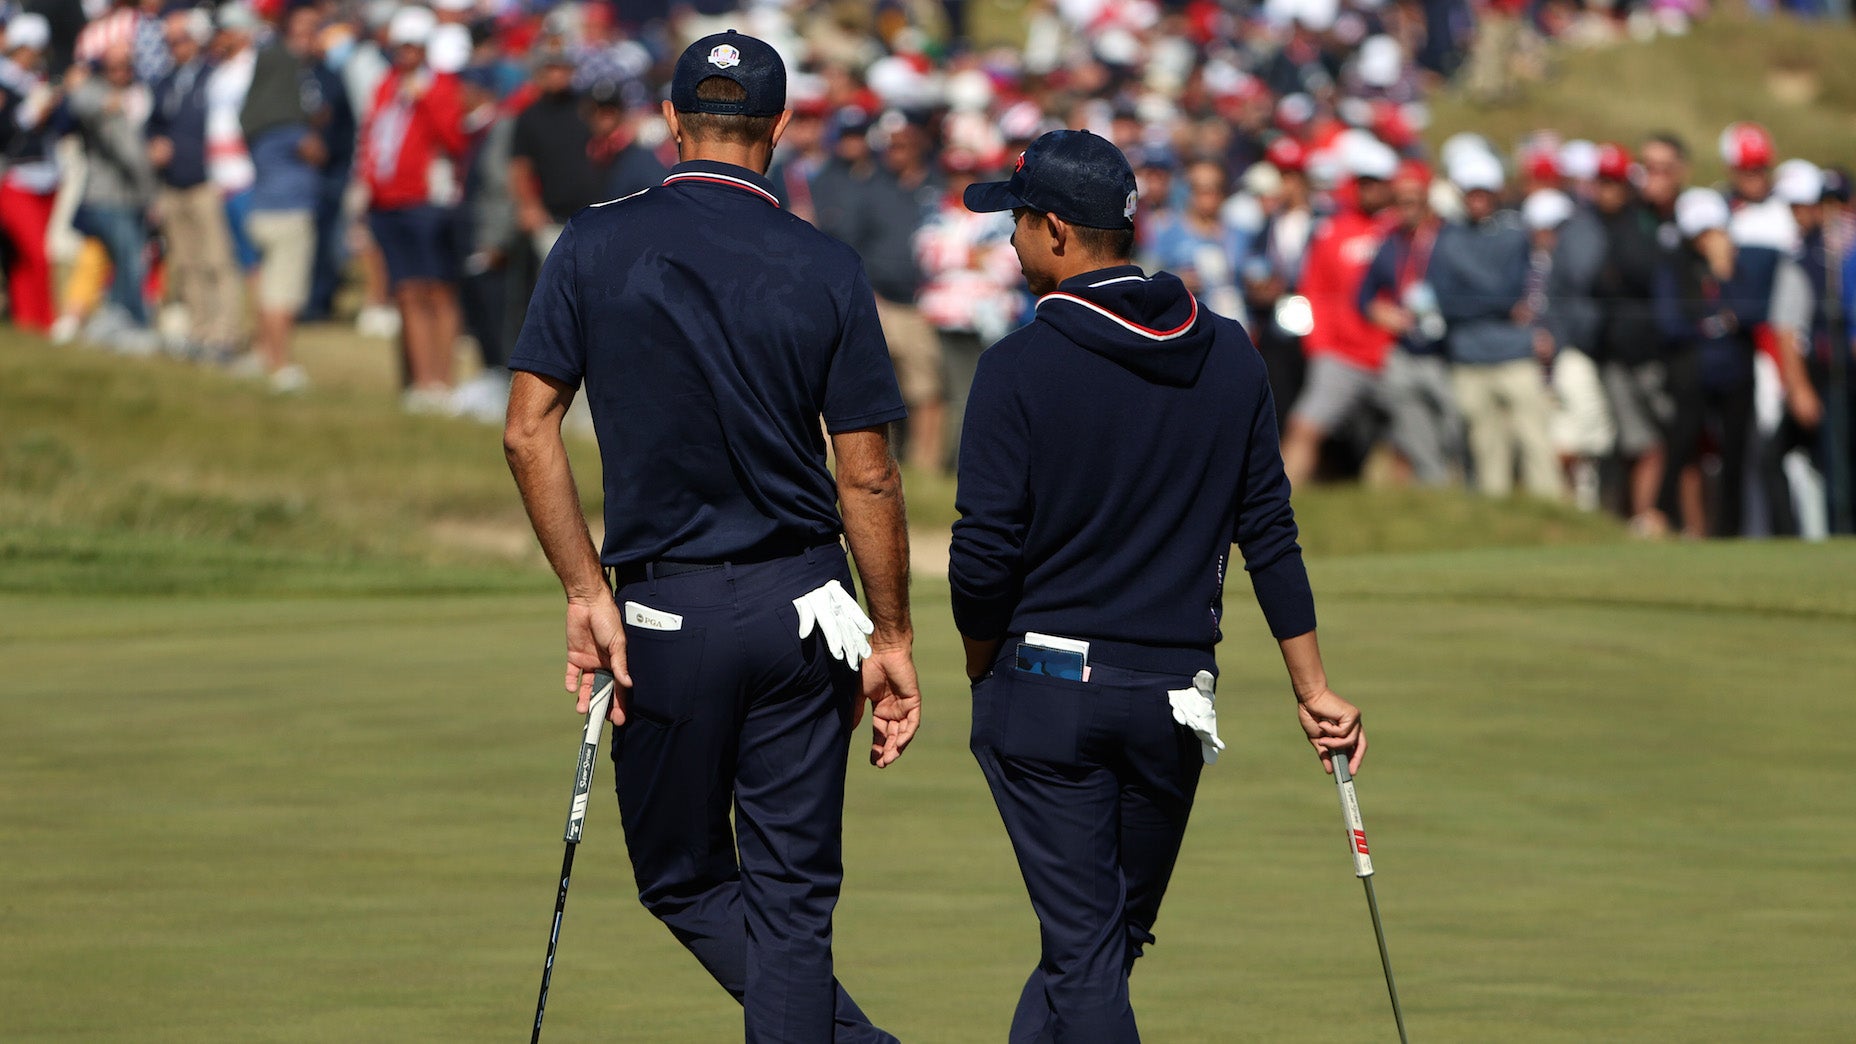 The Perfect Golf Club Lengths Based on Your Height